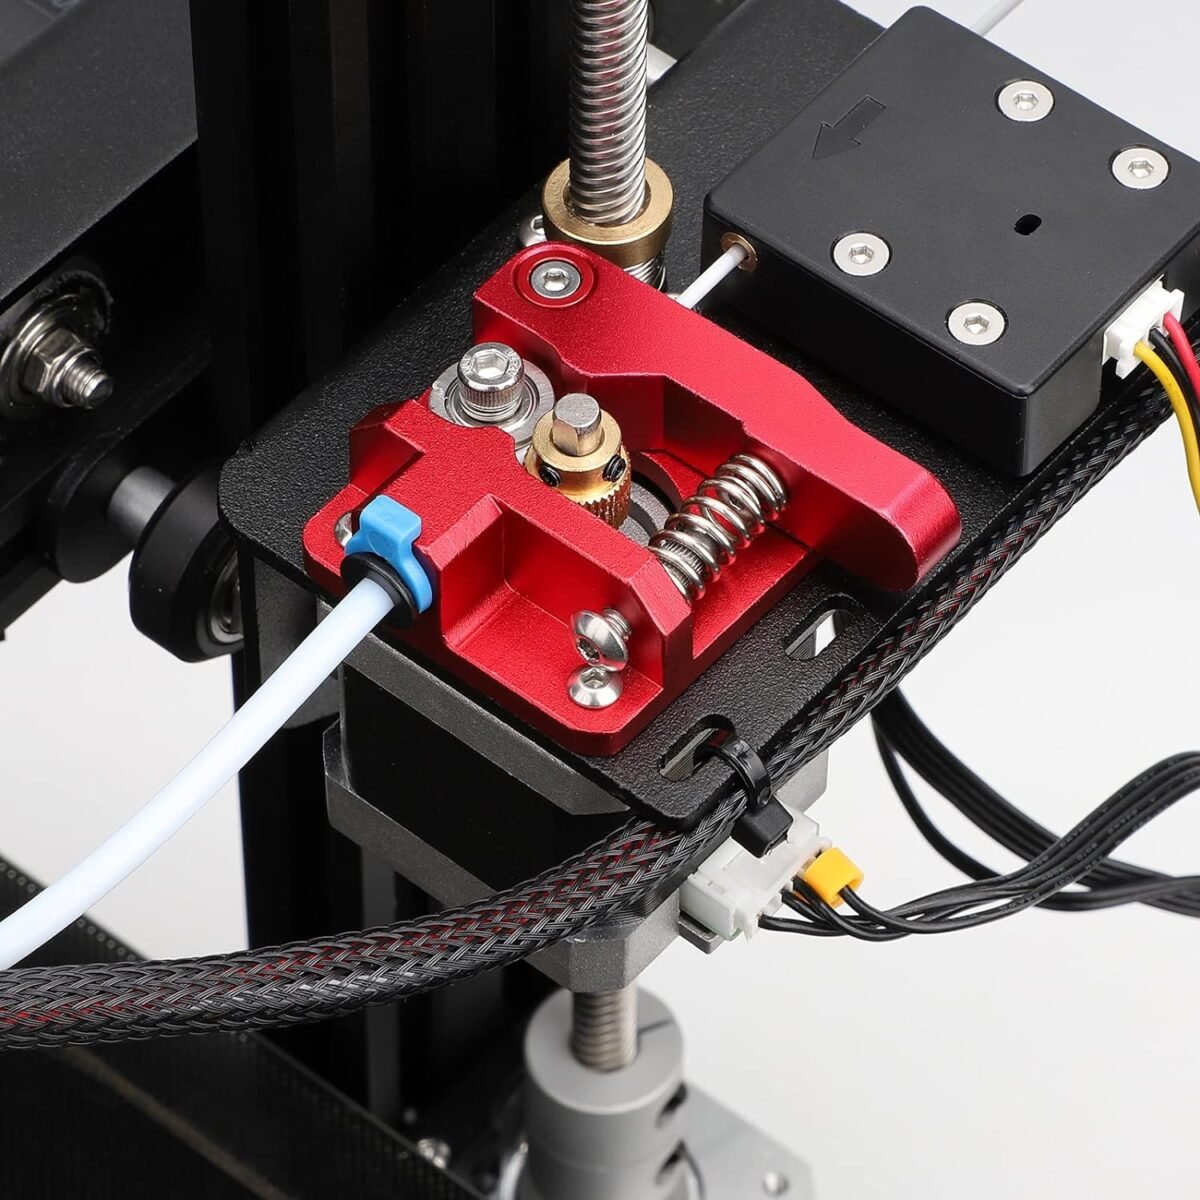 Twotrees CR10 Extruder Upgrade Aluminum Block bowden extruder 1.75mm Filament Reprap Extrusion for Ender 3 CR10 CR10S PRO